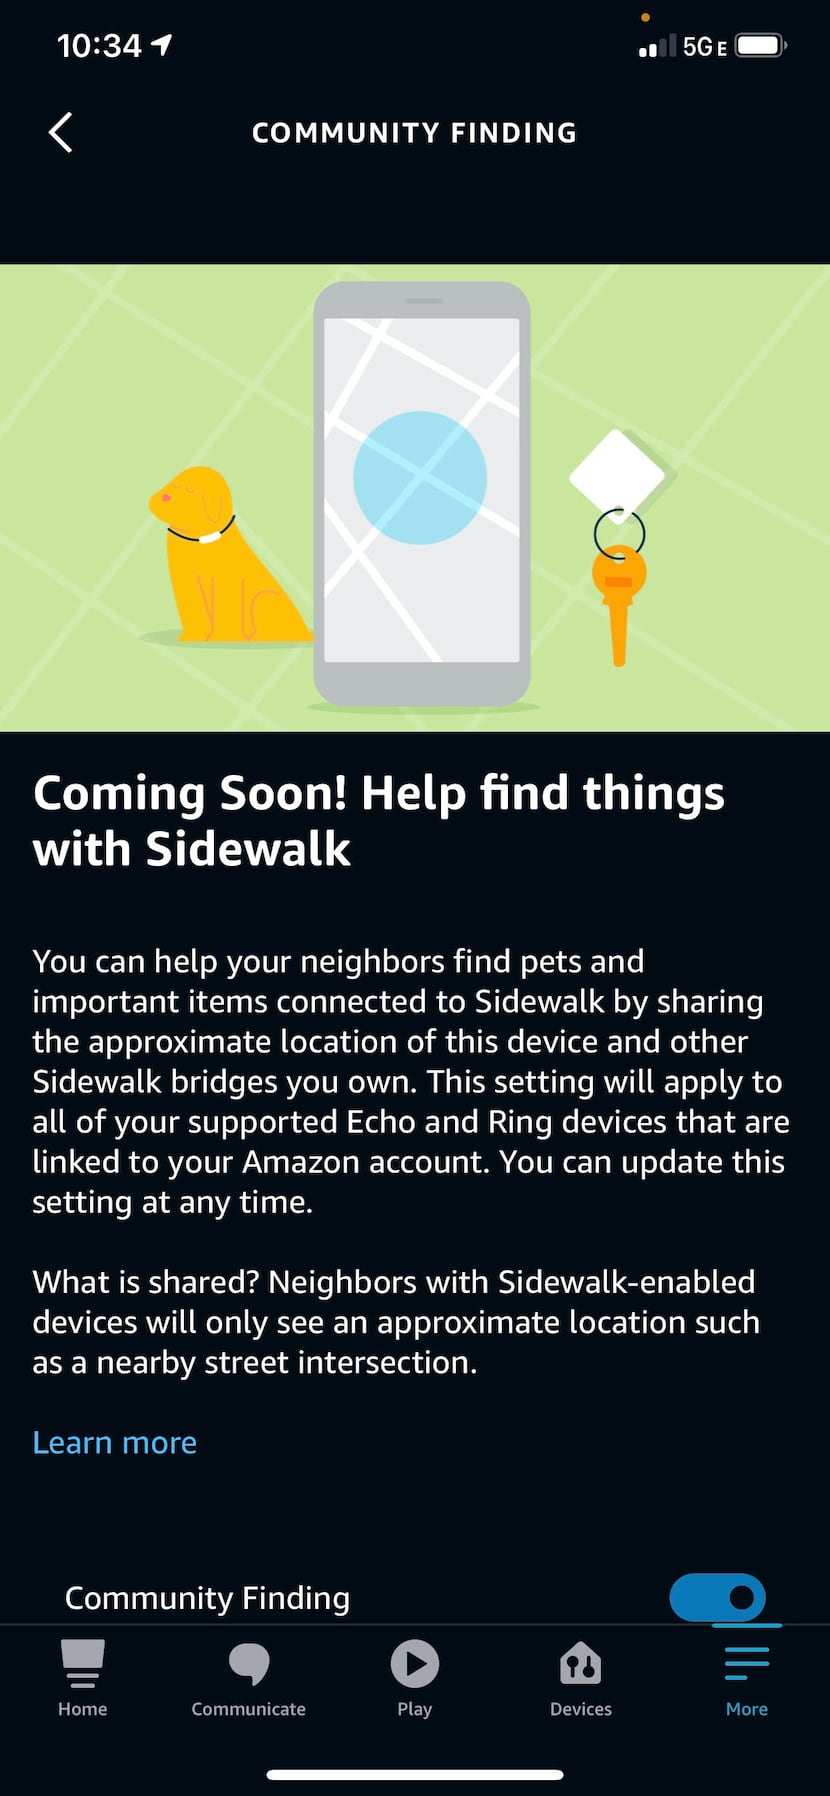 Community finding is part Sidewalk. It shares an approximate location so users can find lost...